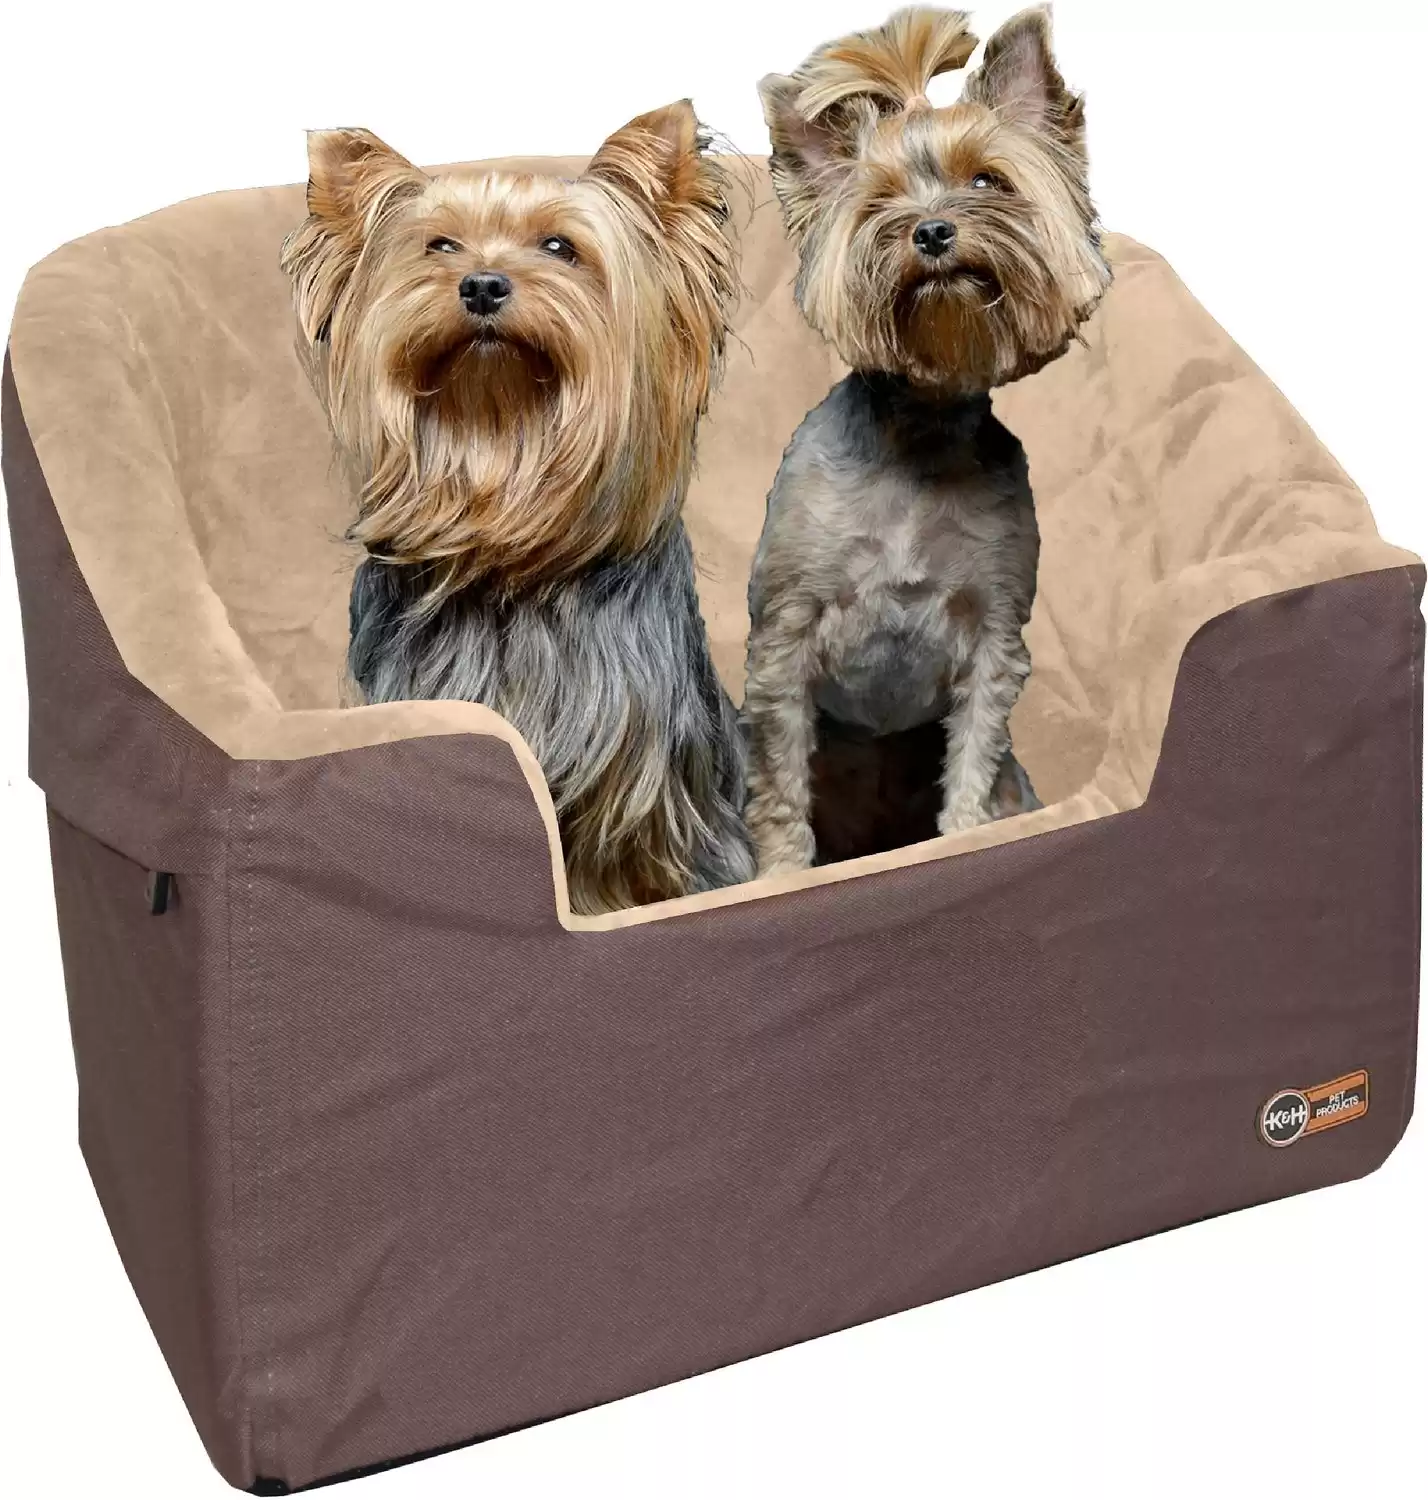 K&H Pet Products Bucket Booster